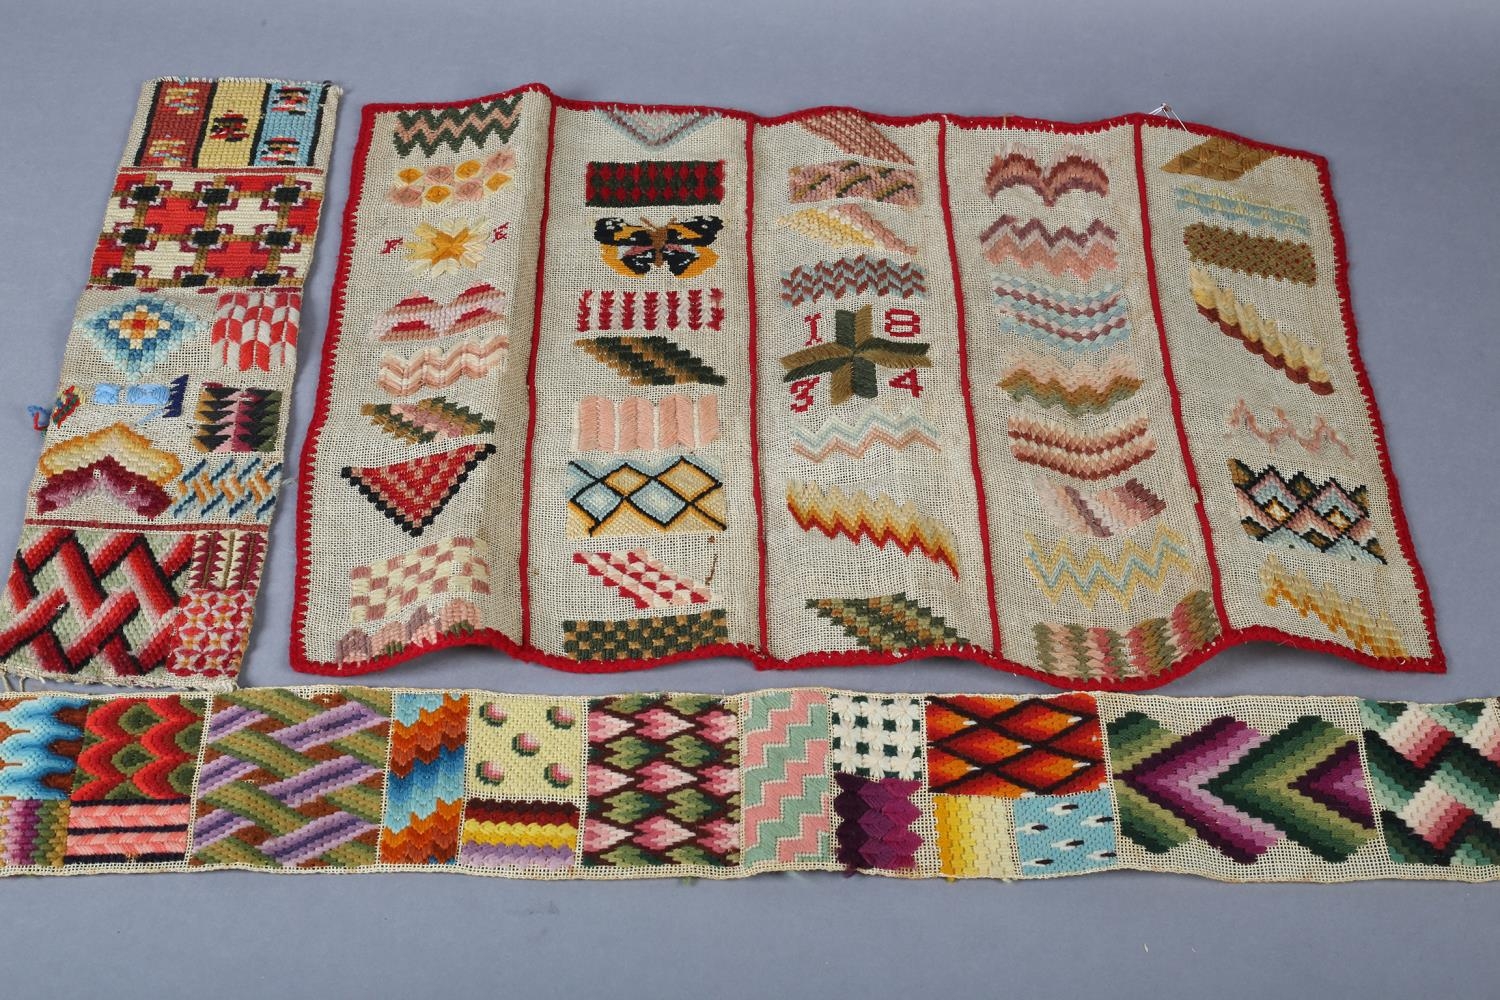 Berlin woolwork: spot samplers, on canvas, one dated 1834, the first in rectangular form, divided